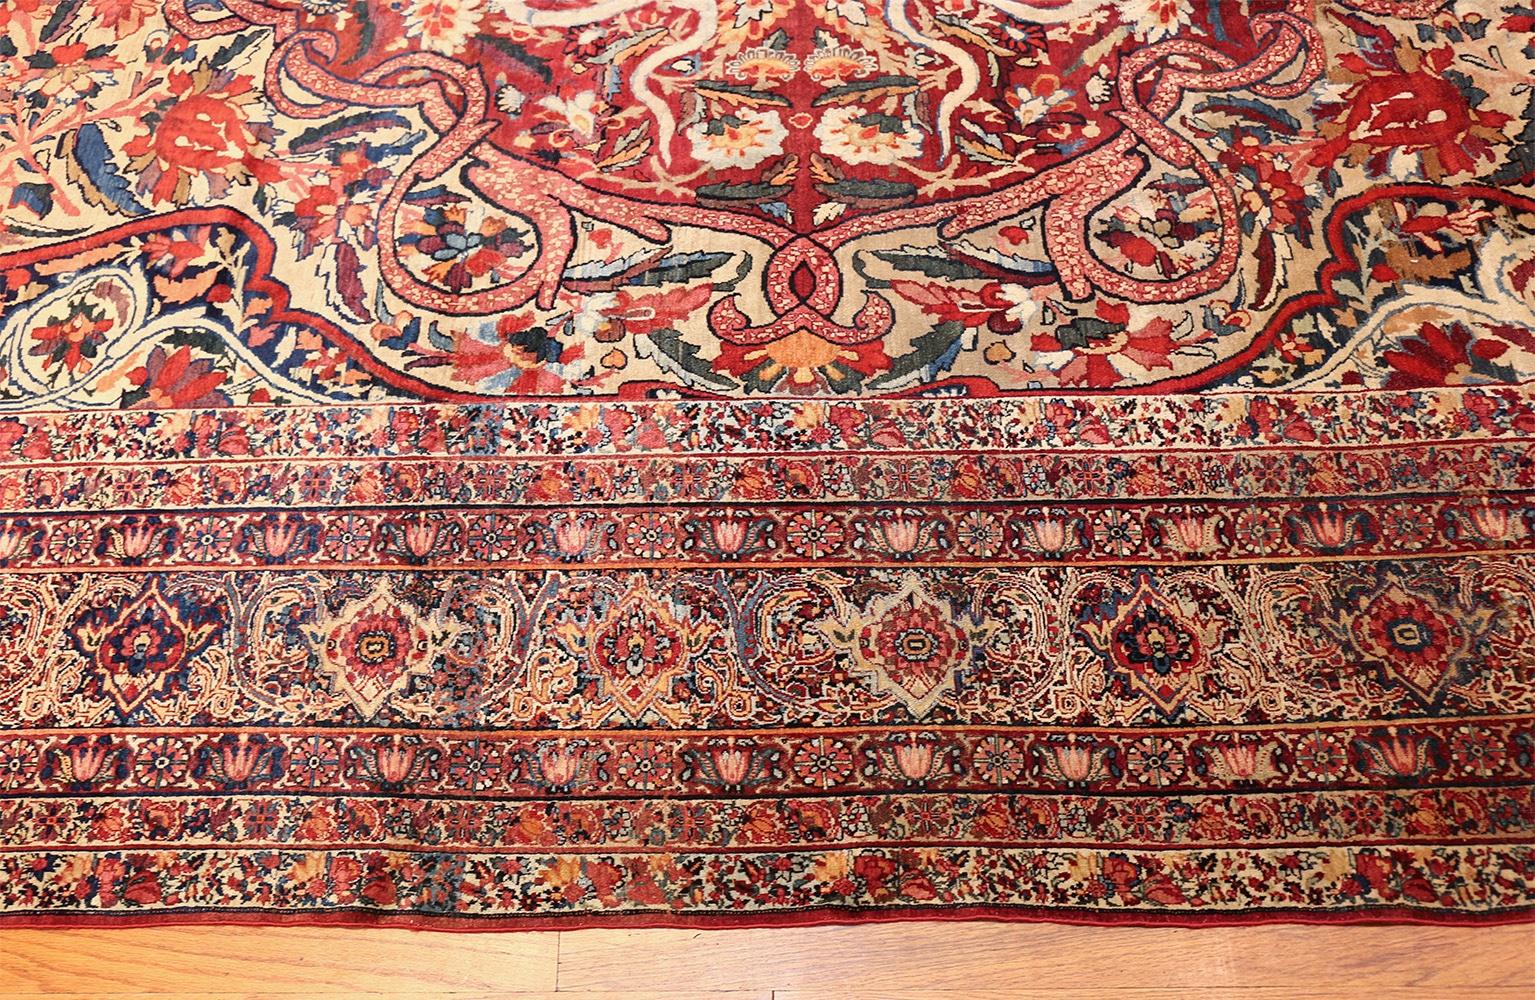 Extremely Fine Large Size Silk and Wool Antique Persian Lavar Kerman Rug, Country of Origin / Rug Type: Antique Persian Rugs, Circa Late 19th Century. Size: 10 ft 6 in x 15 ft 3 in (3.2 m x 4.65 m)

 